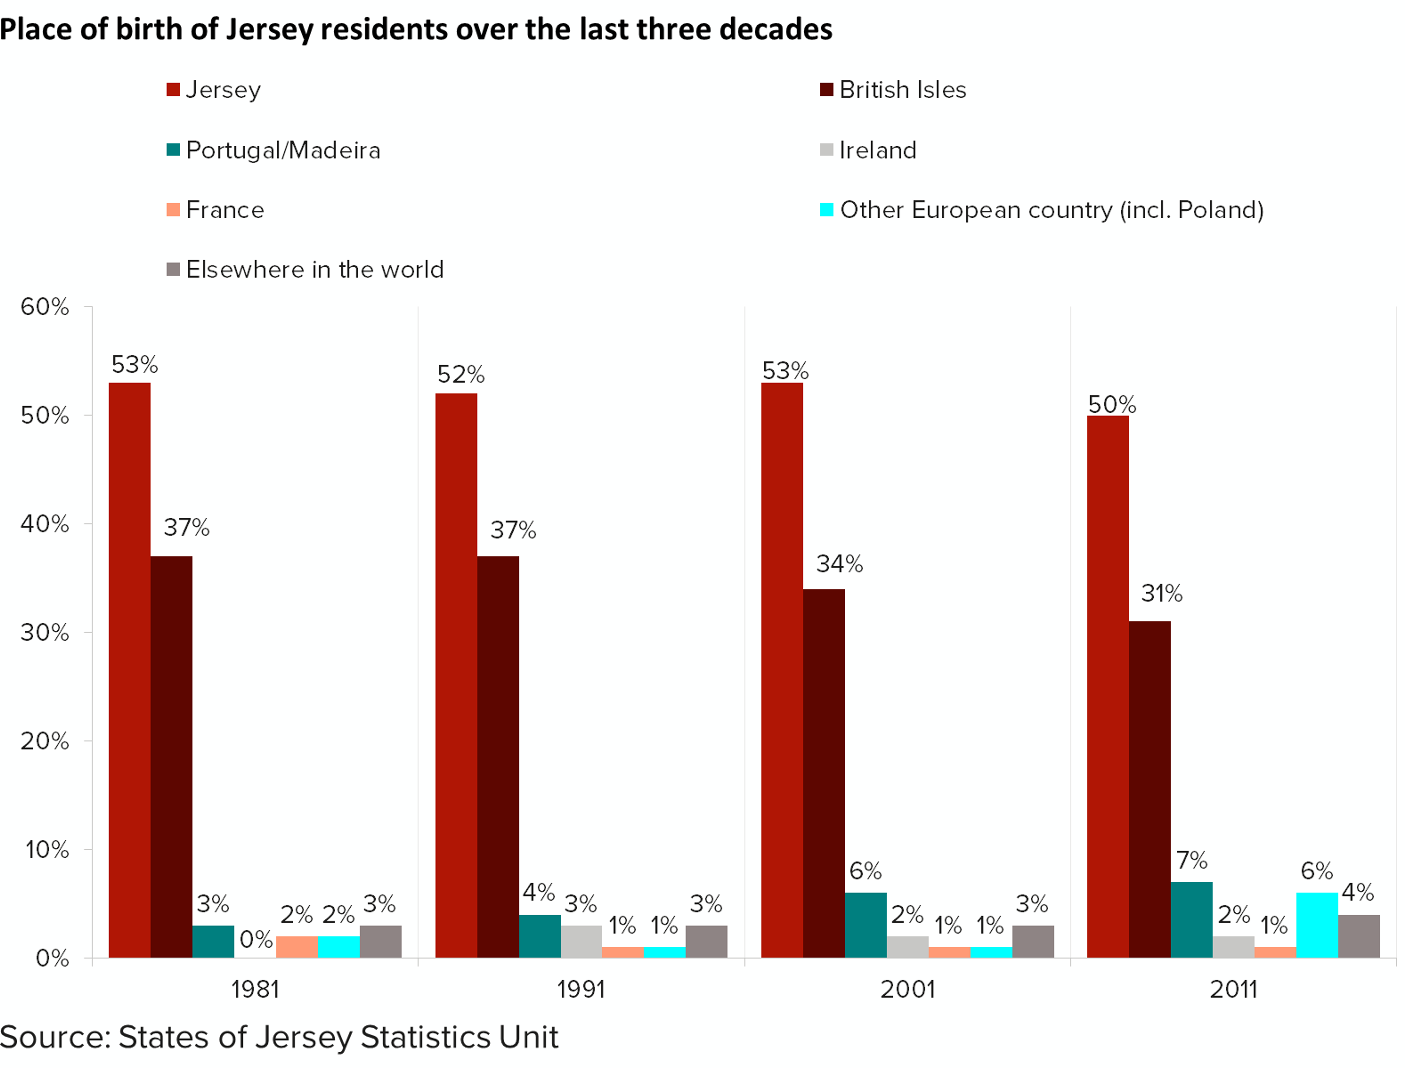 Chart showing place of birth of Jersey residents over the last three decades